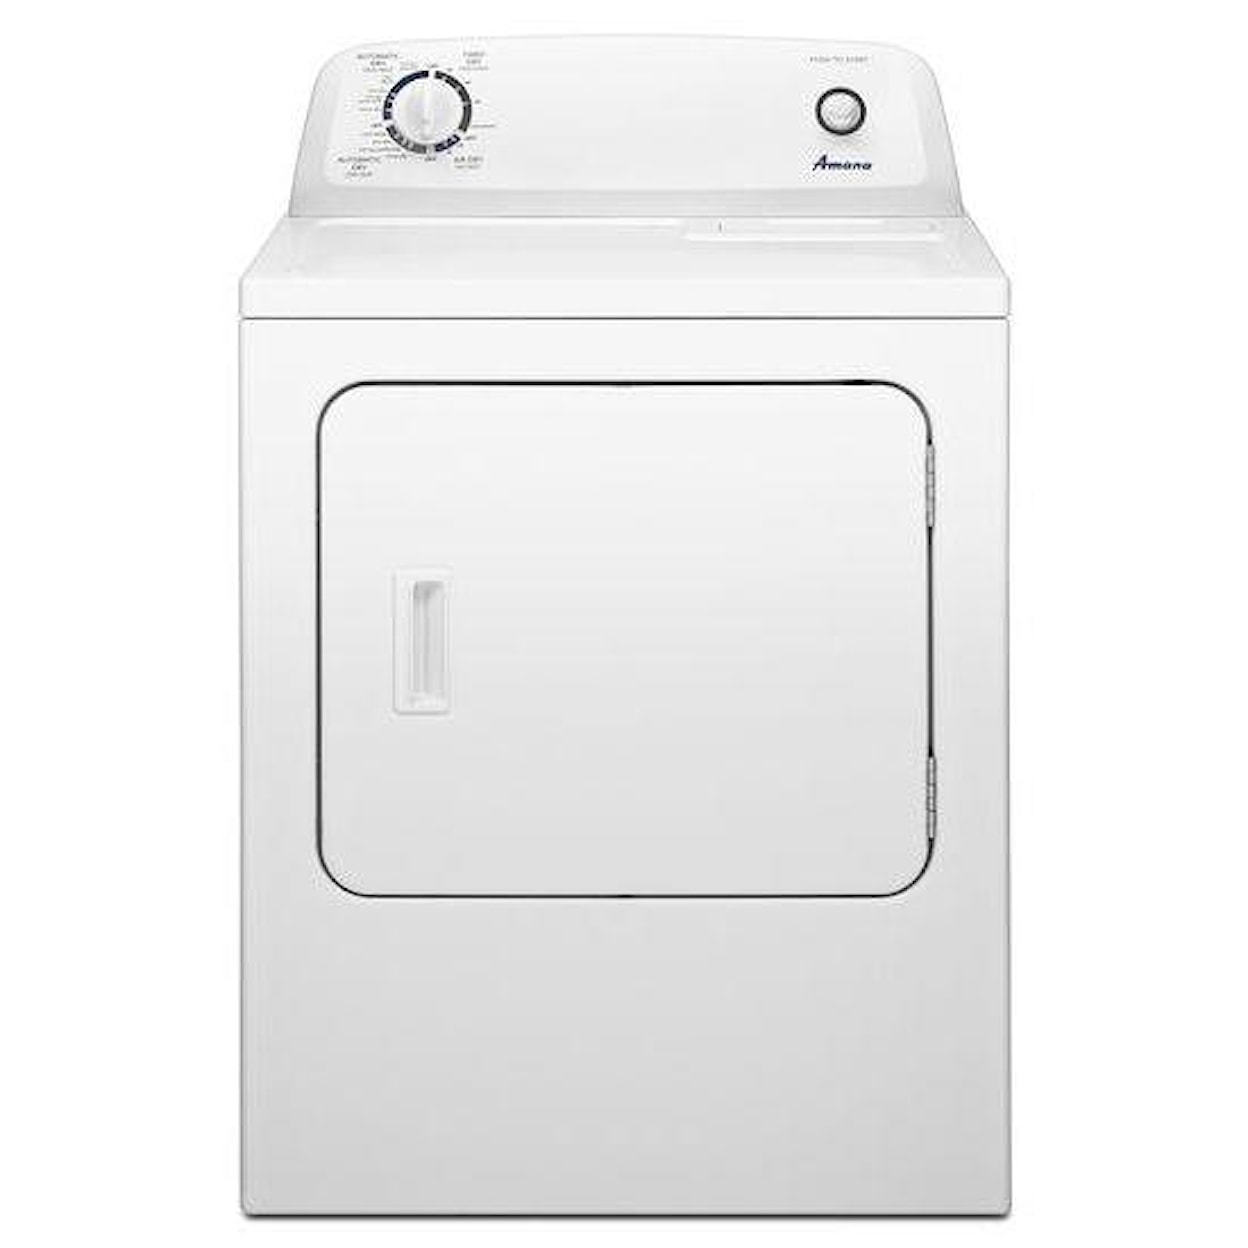 Amana Dryers 6.5 cu. ft. Front-Load Electric Dryer